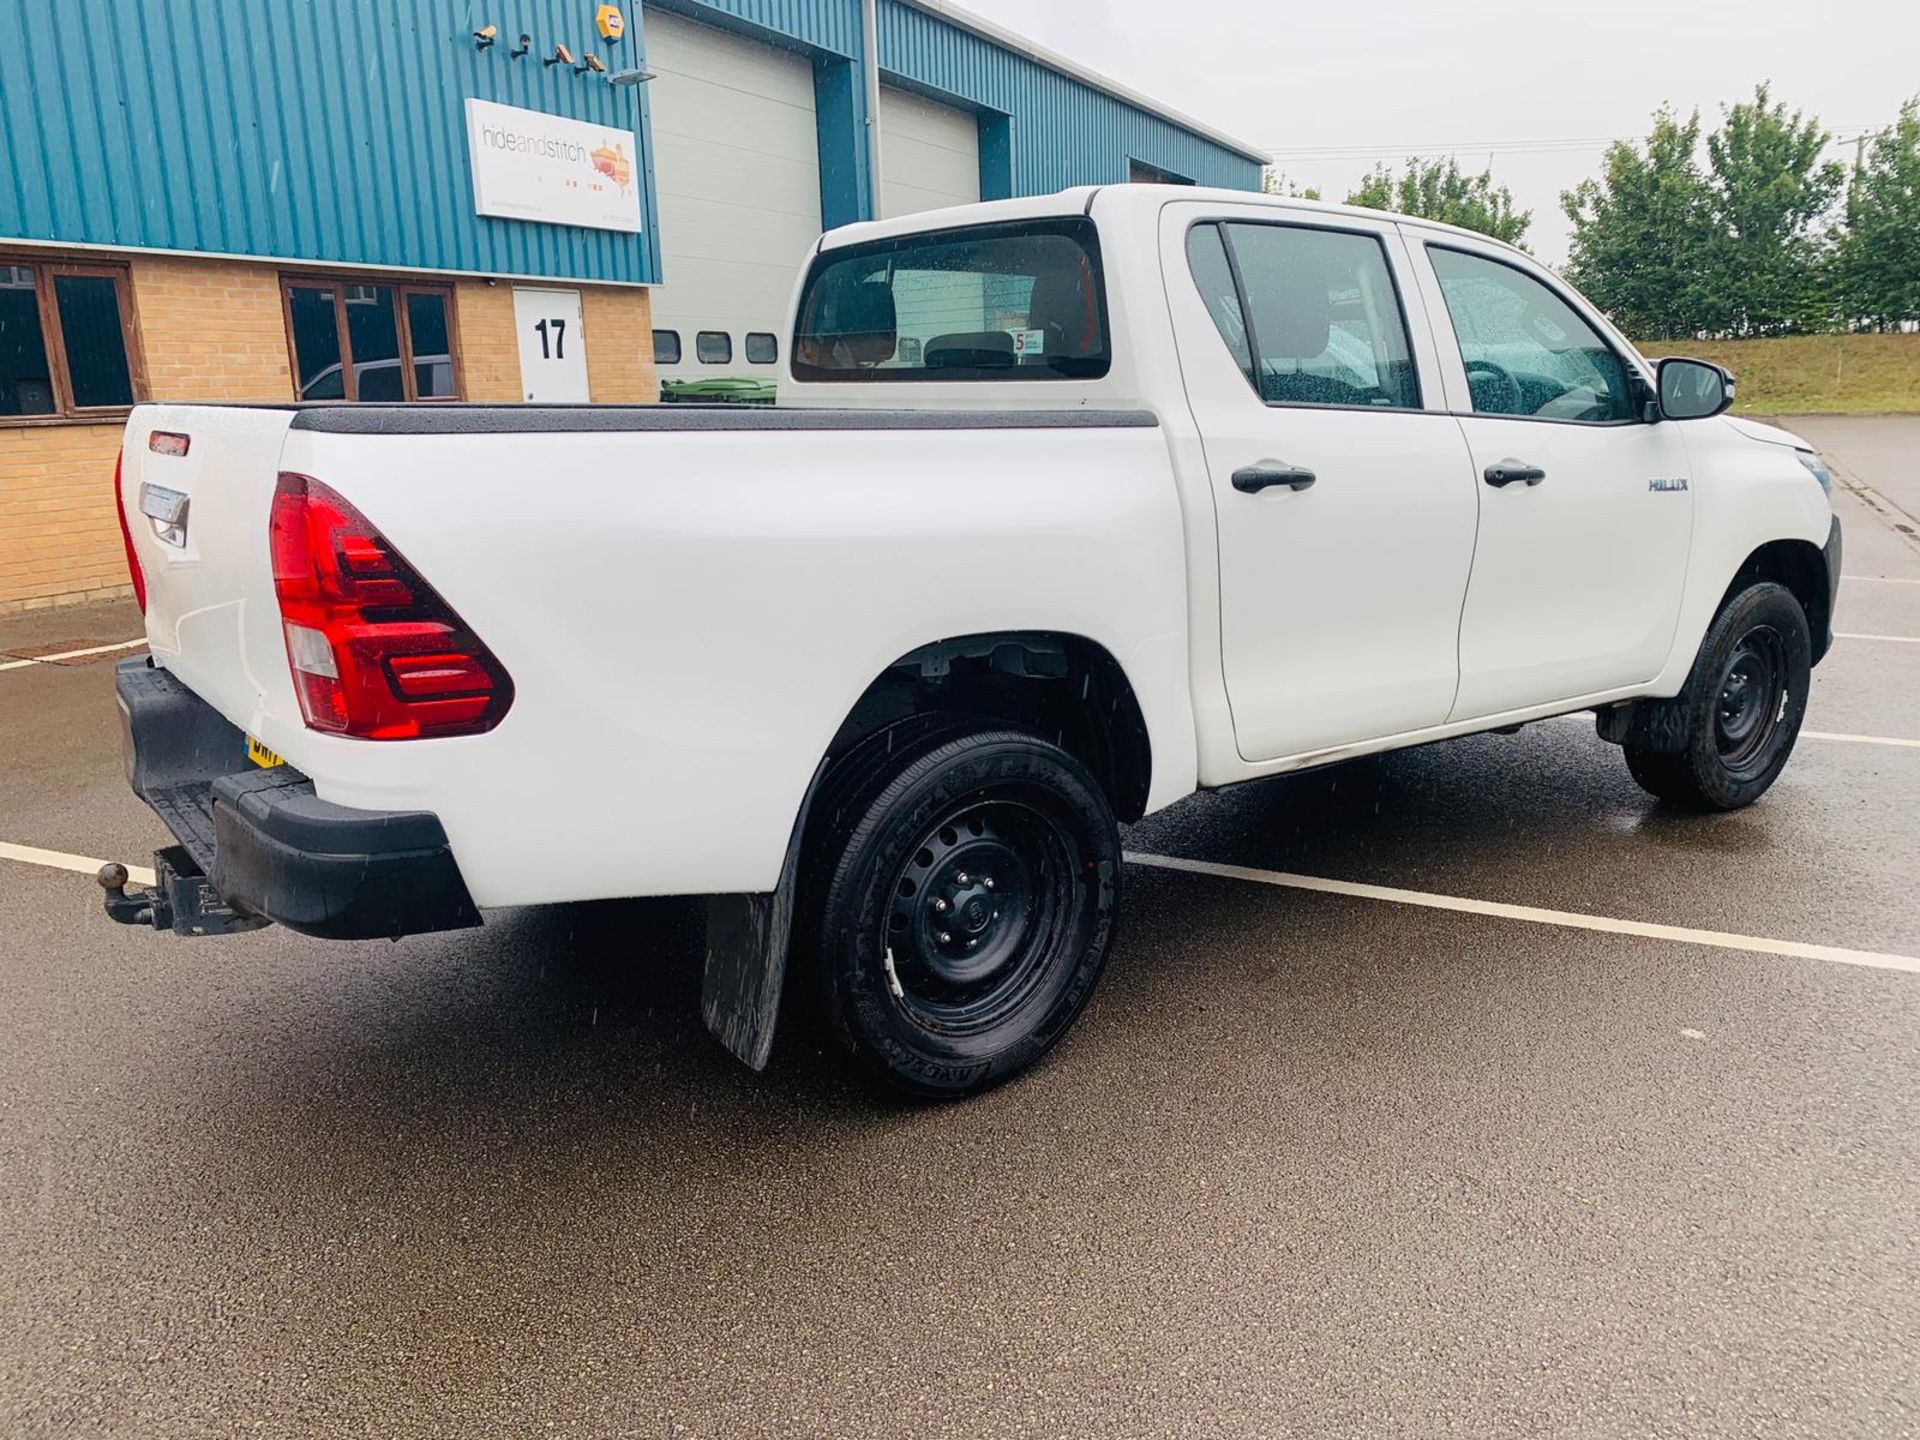 (RESERVE MET) Toyota Hilux 2.4 D-4D Active 4WD Double Cab Pick Up - 2017 17 Reg - Air Con - Euro 6b - Image 2 of 31